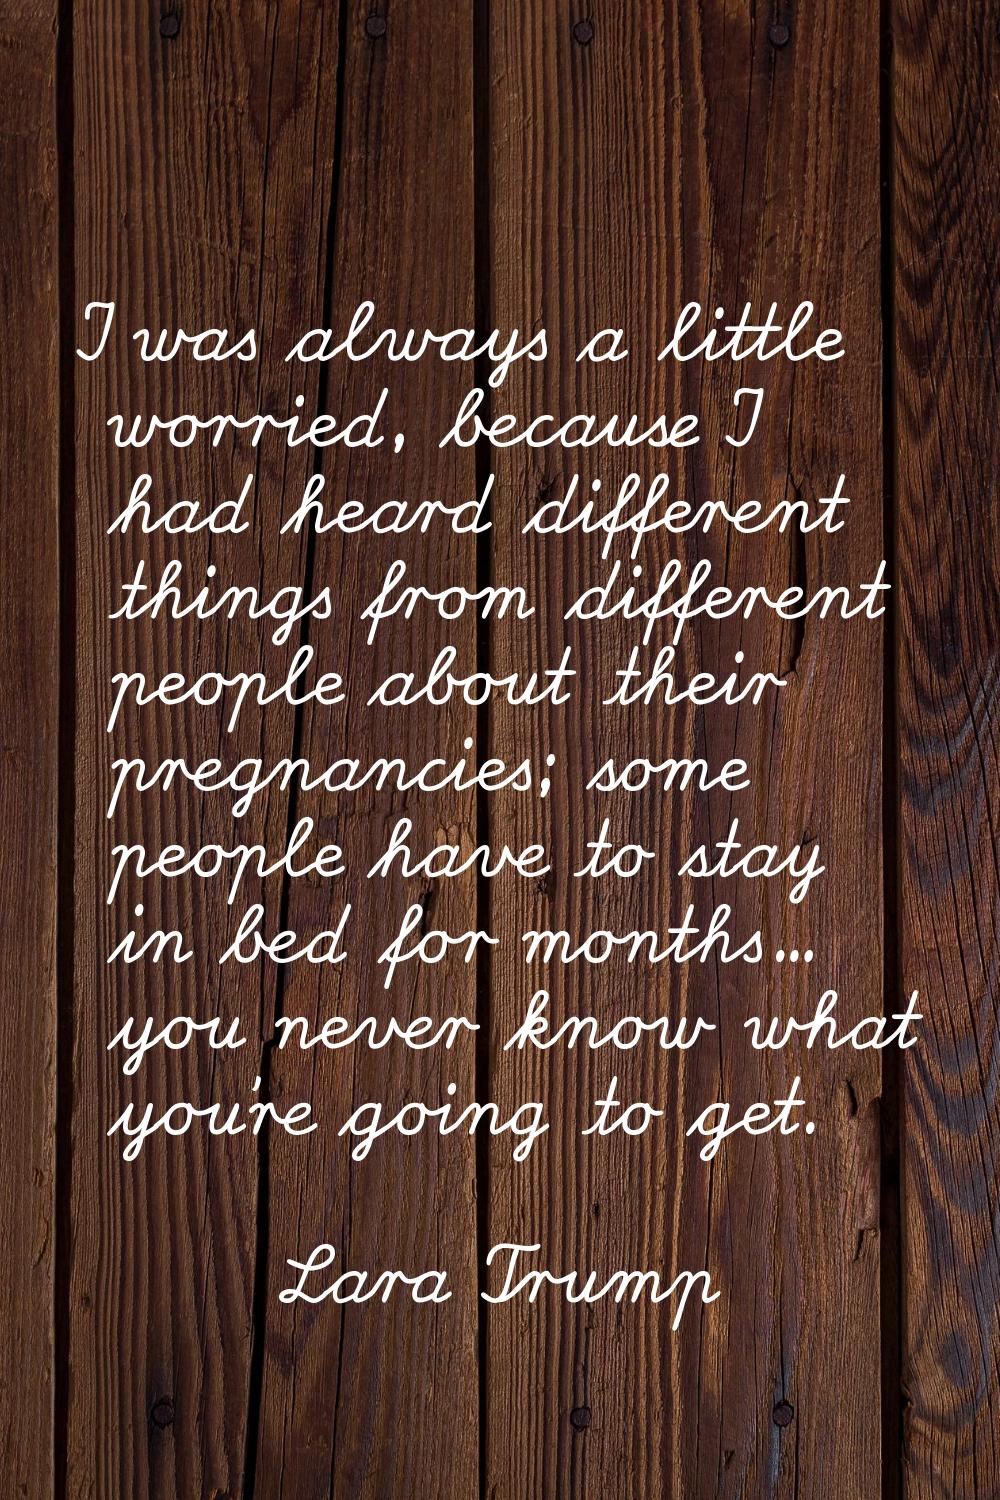 I was always a little worried, because I had heard different things from different people about the